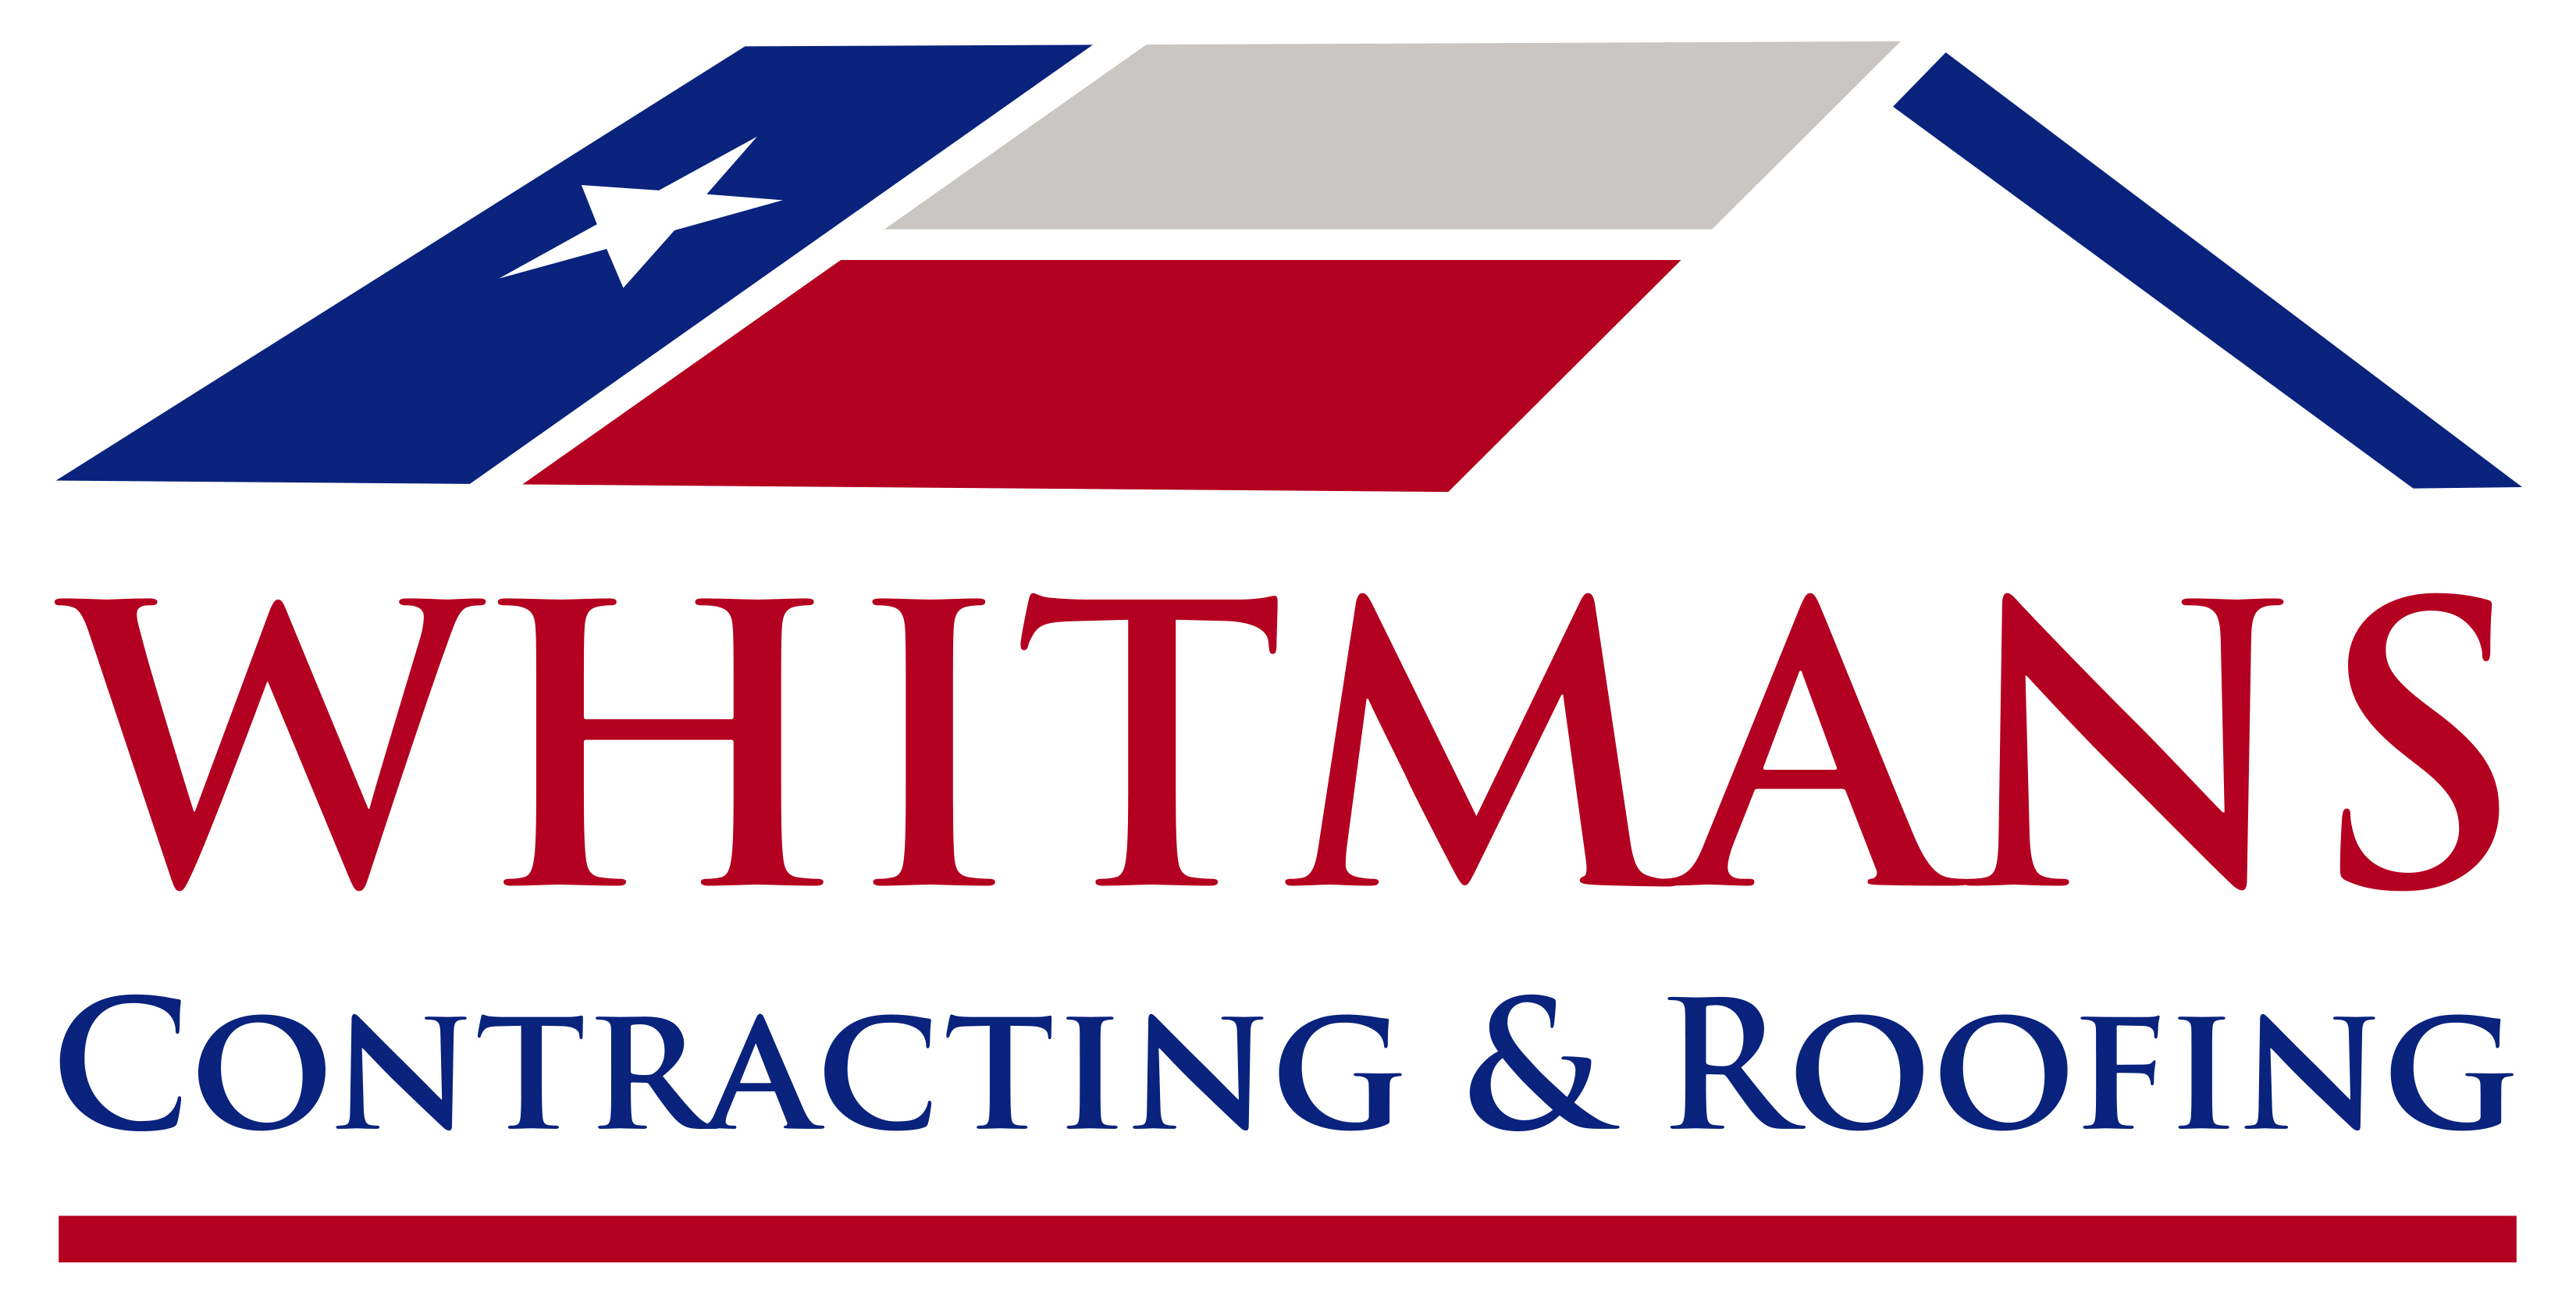 Whitman's Contracting and Roofing Logo